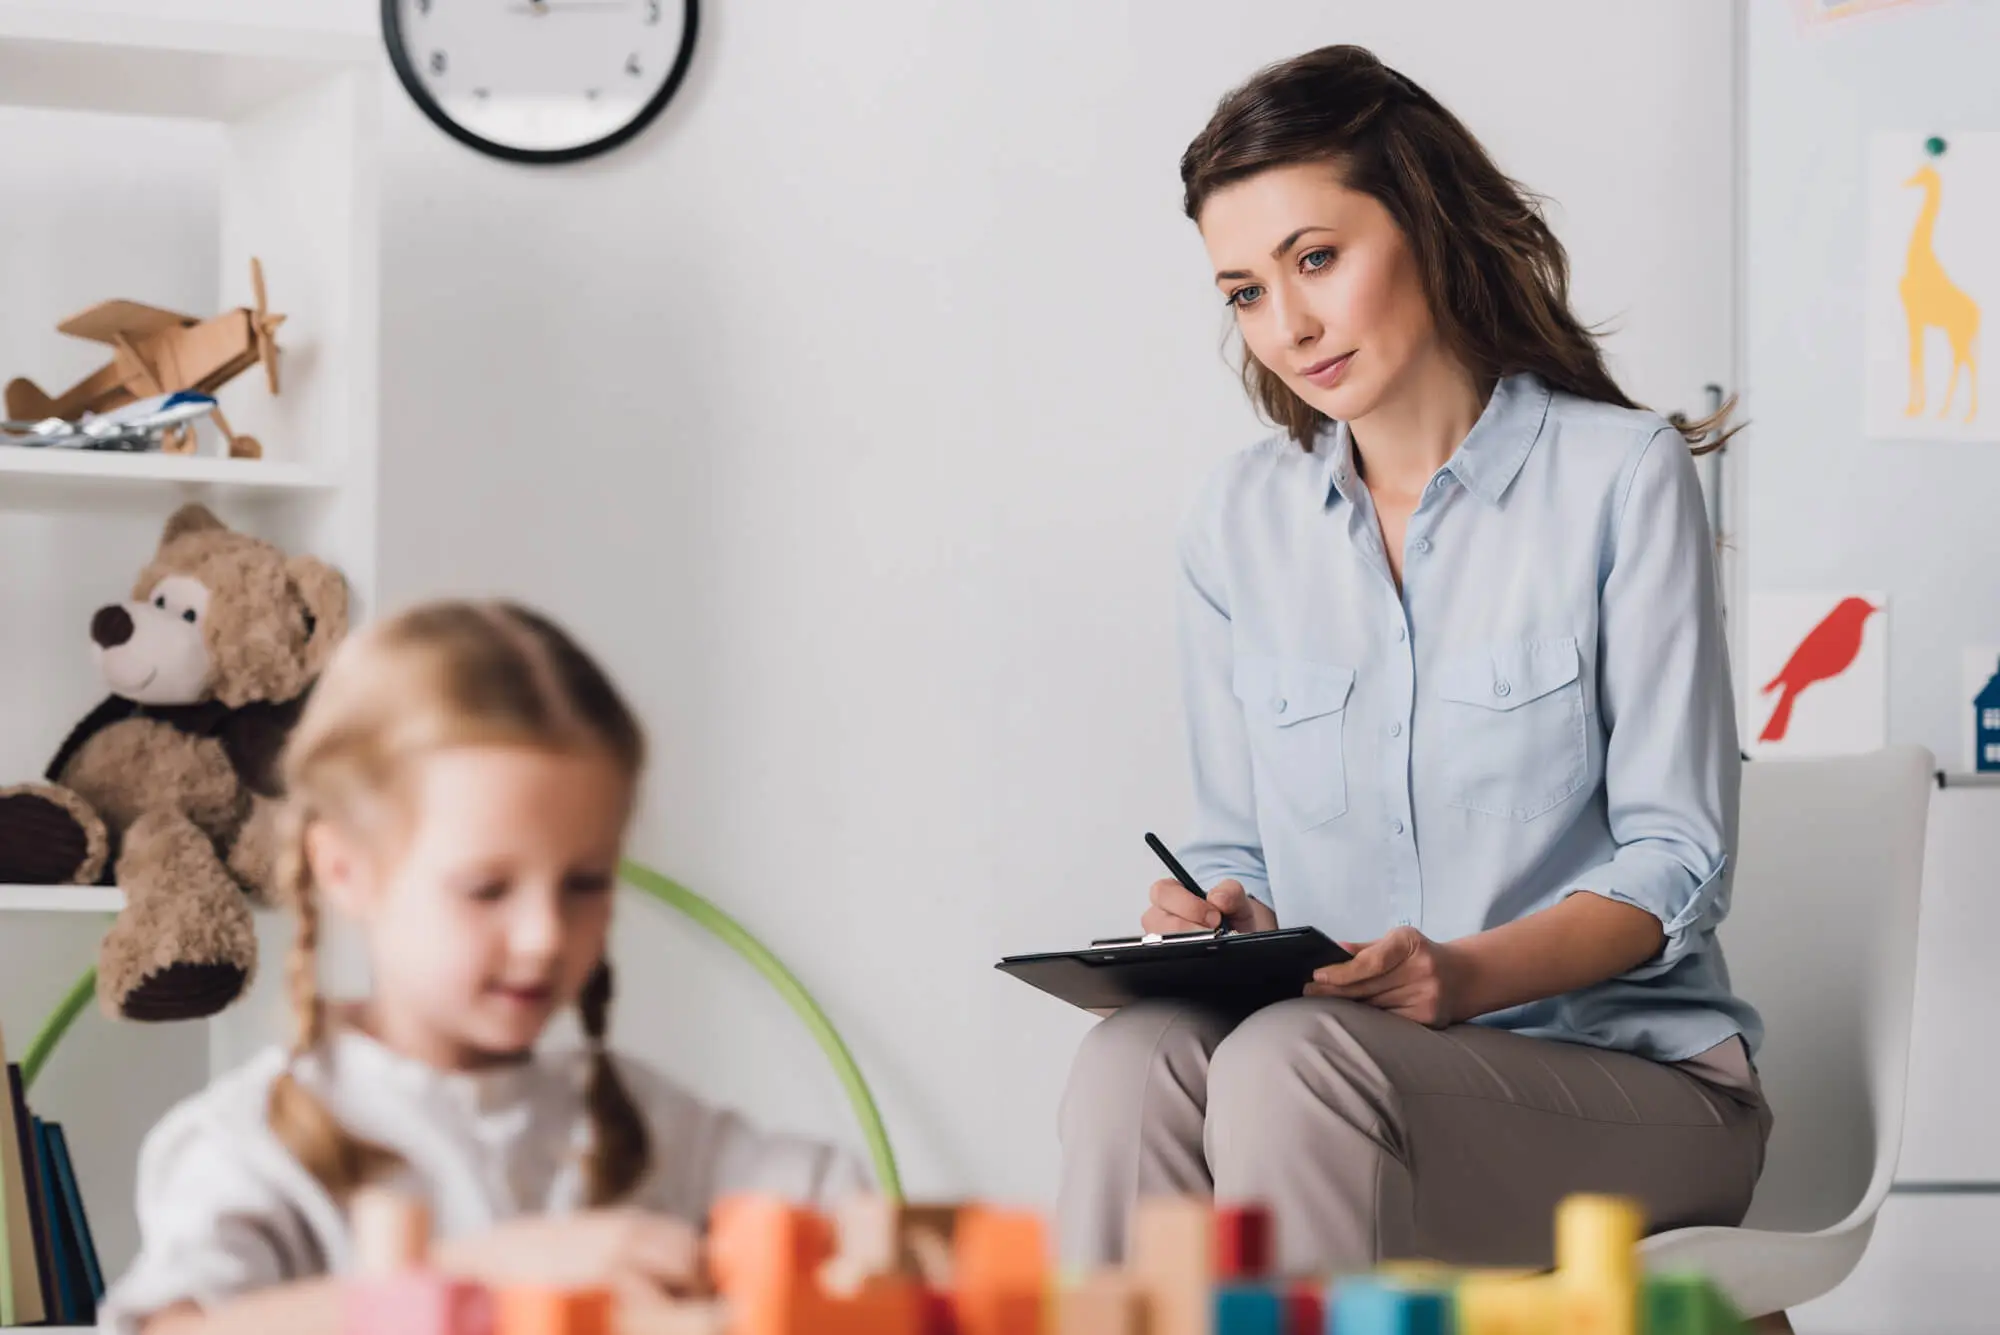 female adult with clipboard observes female child playing with toys